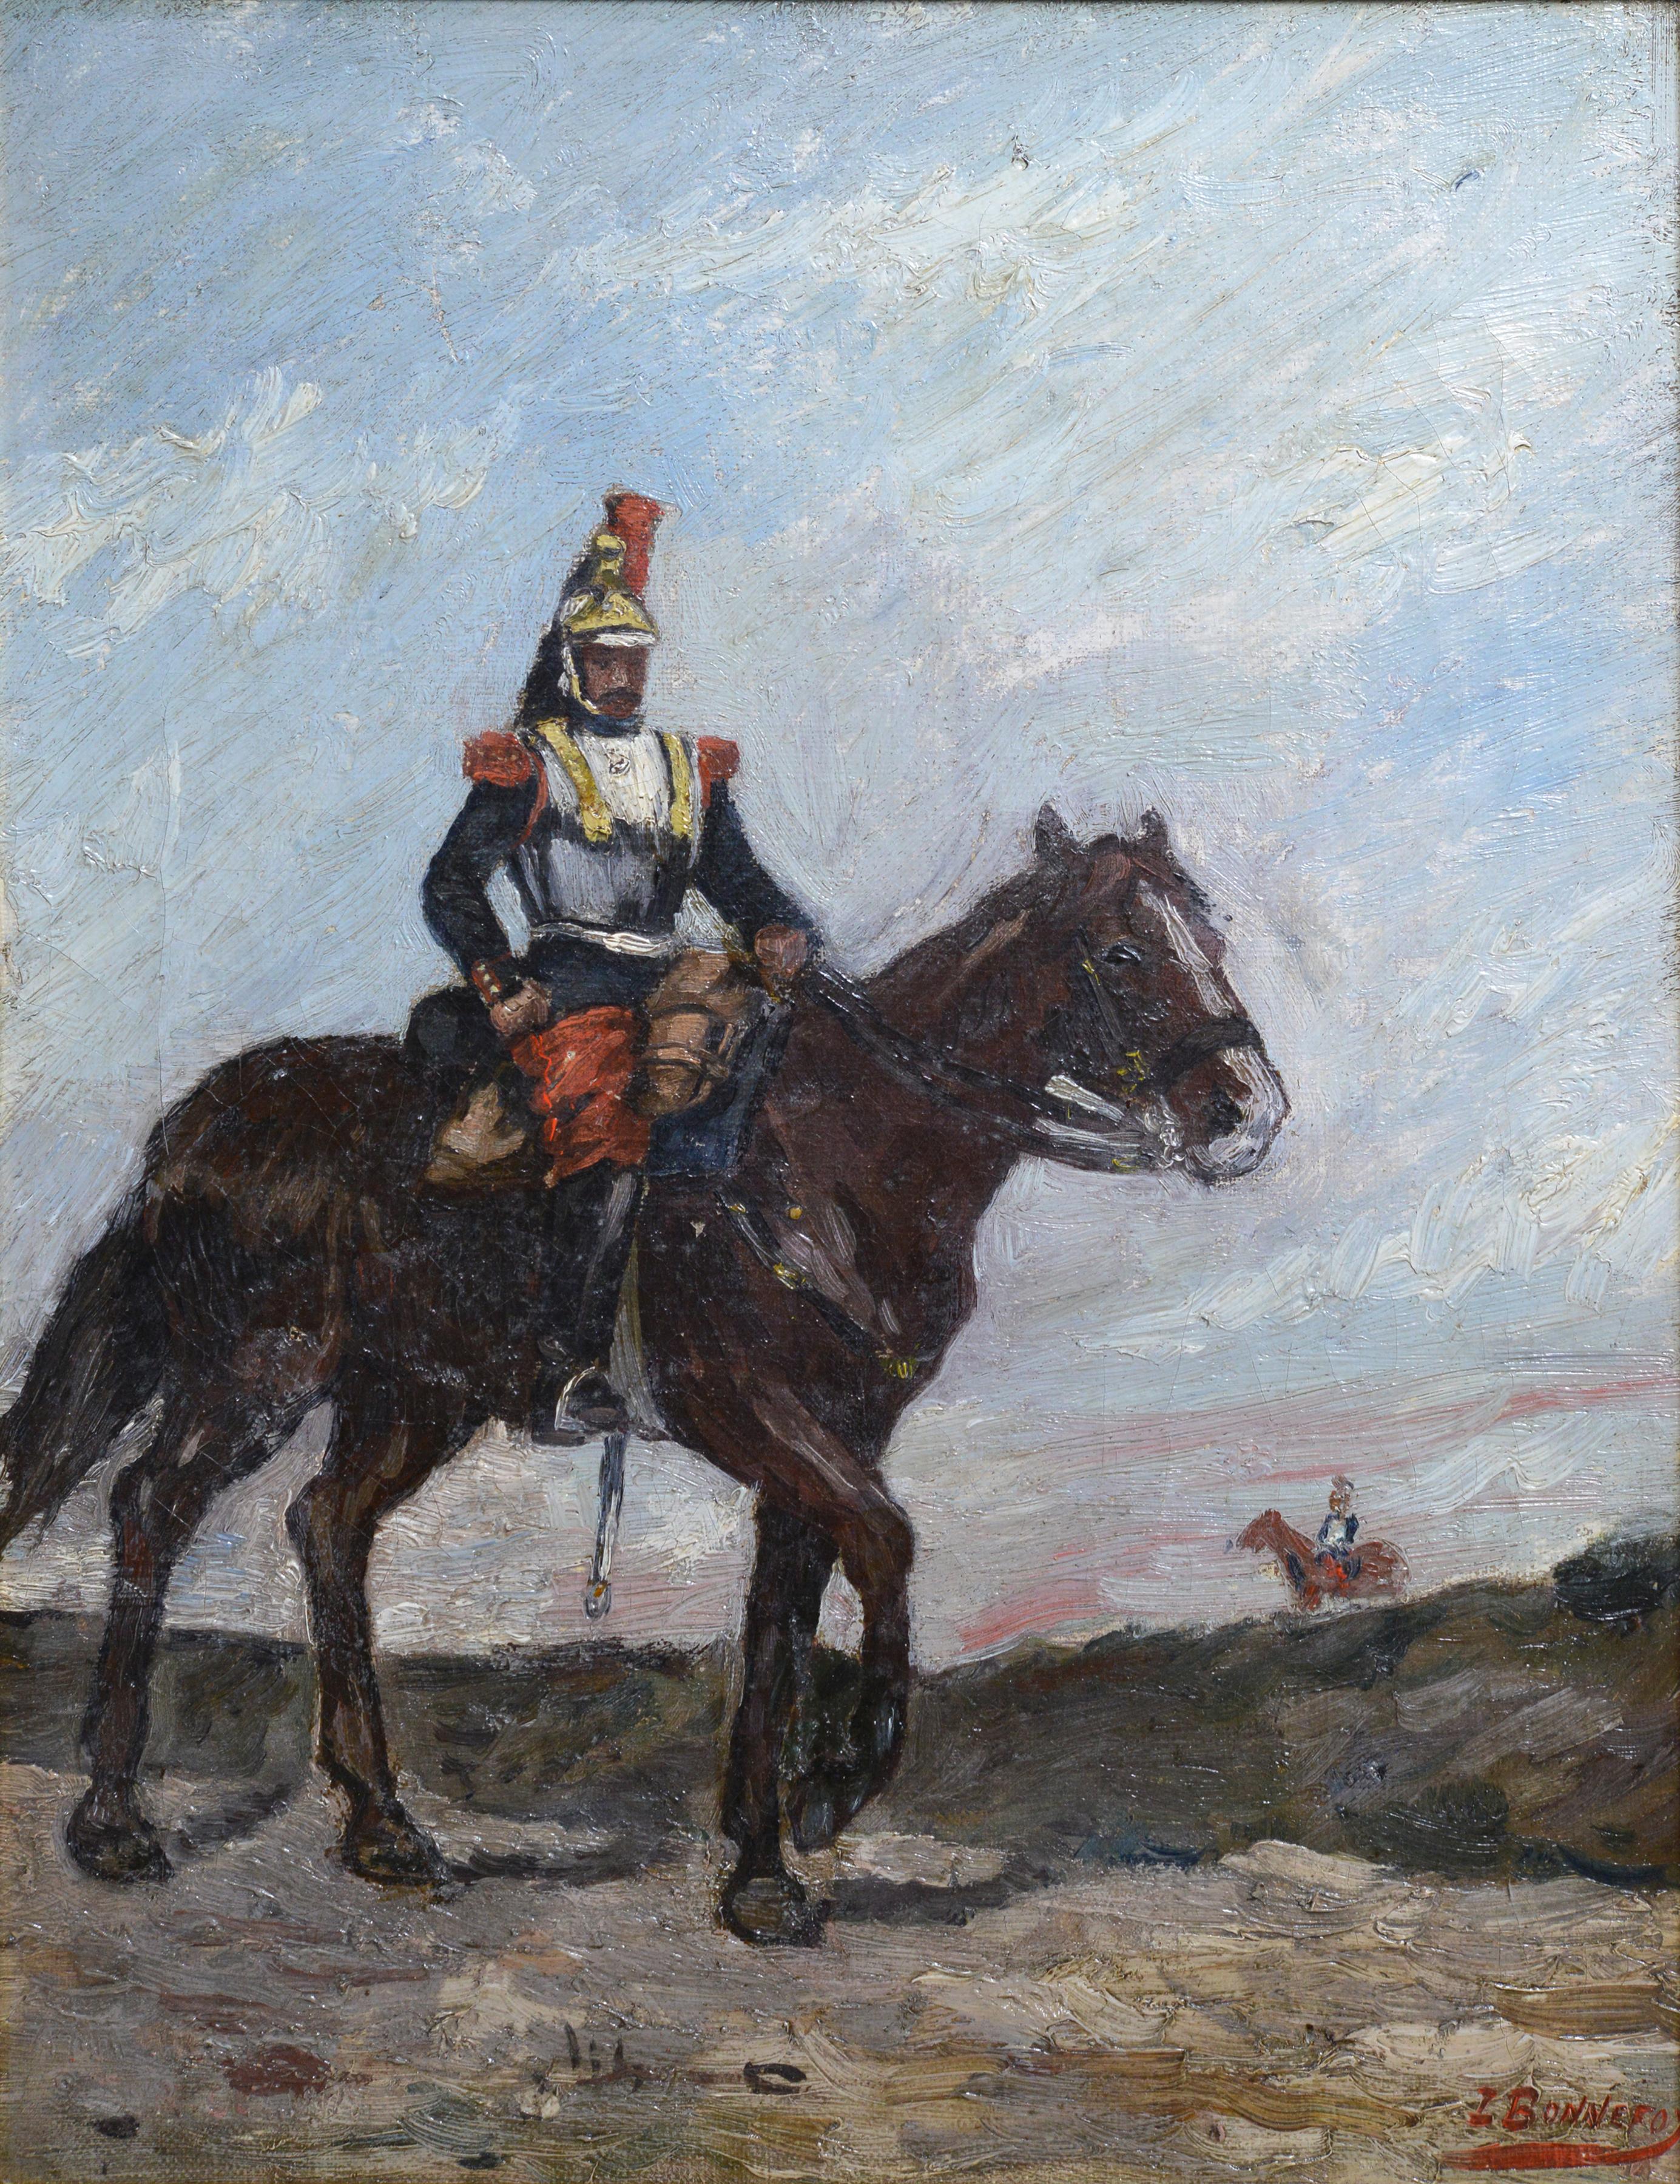 French Cuirassier on Mounted Patrol 19th Century Oil Painting by Bonnefoy - Brown Figurative Painting by Unknown